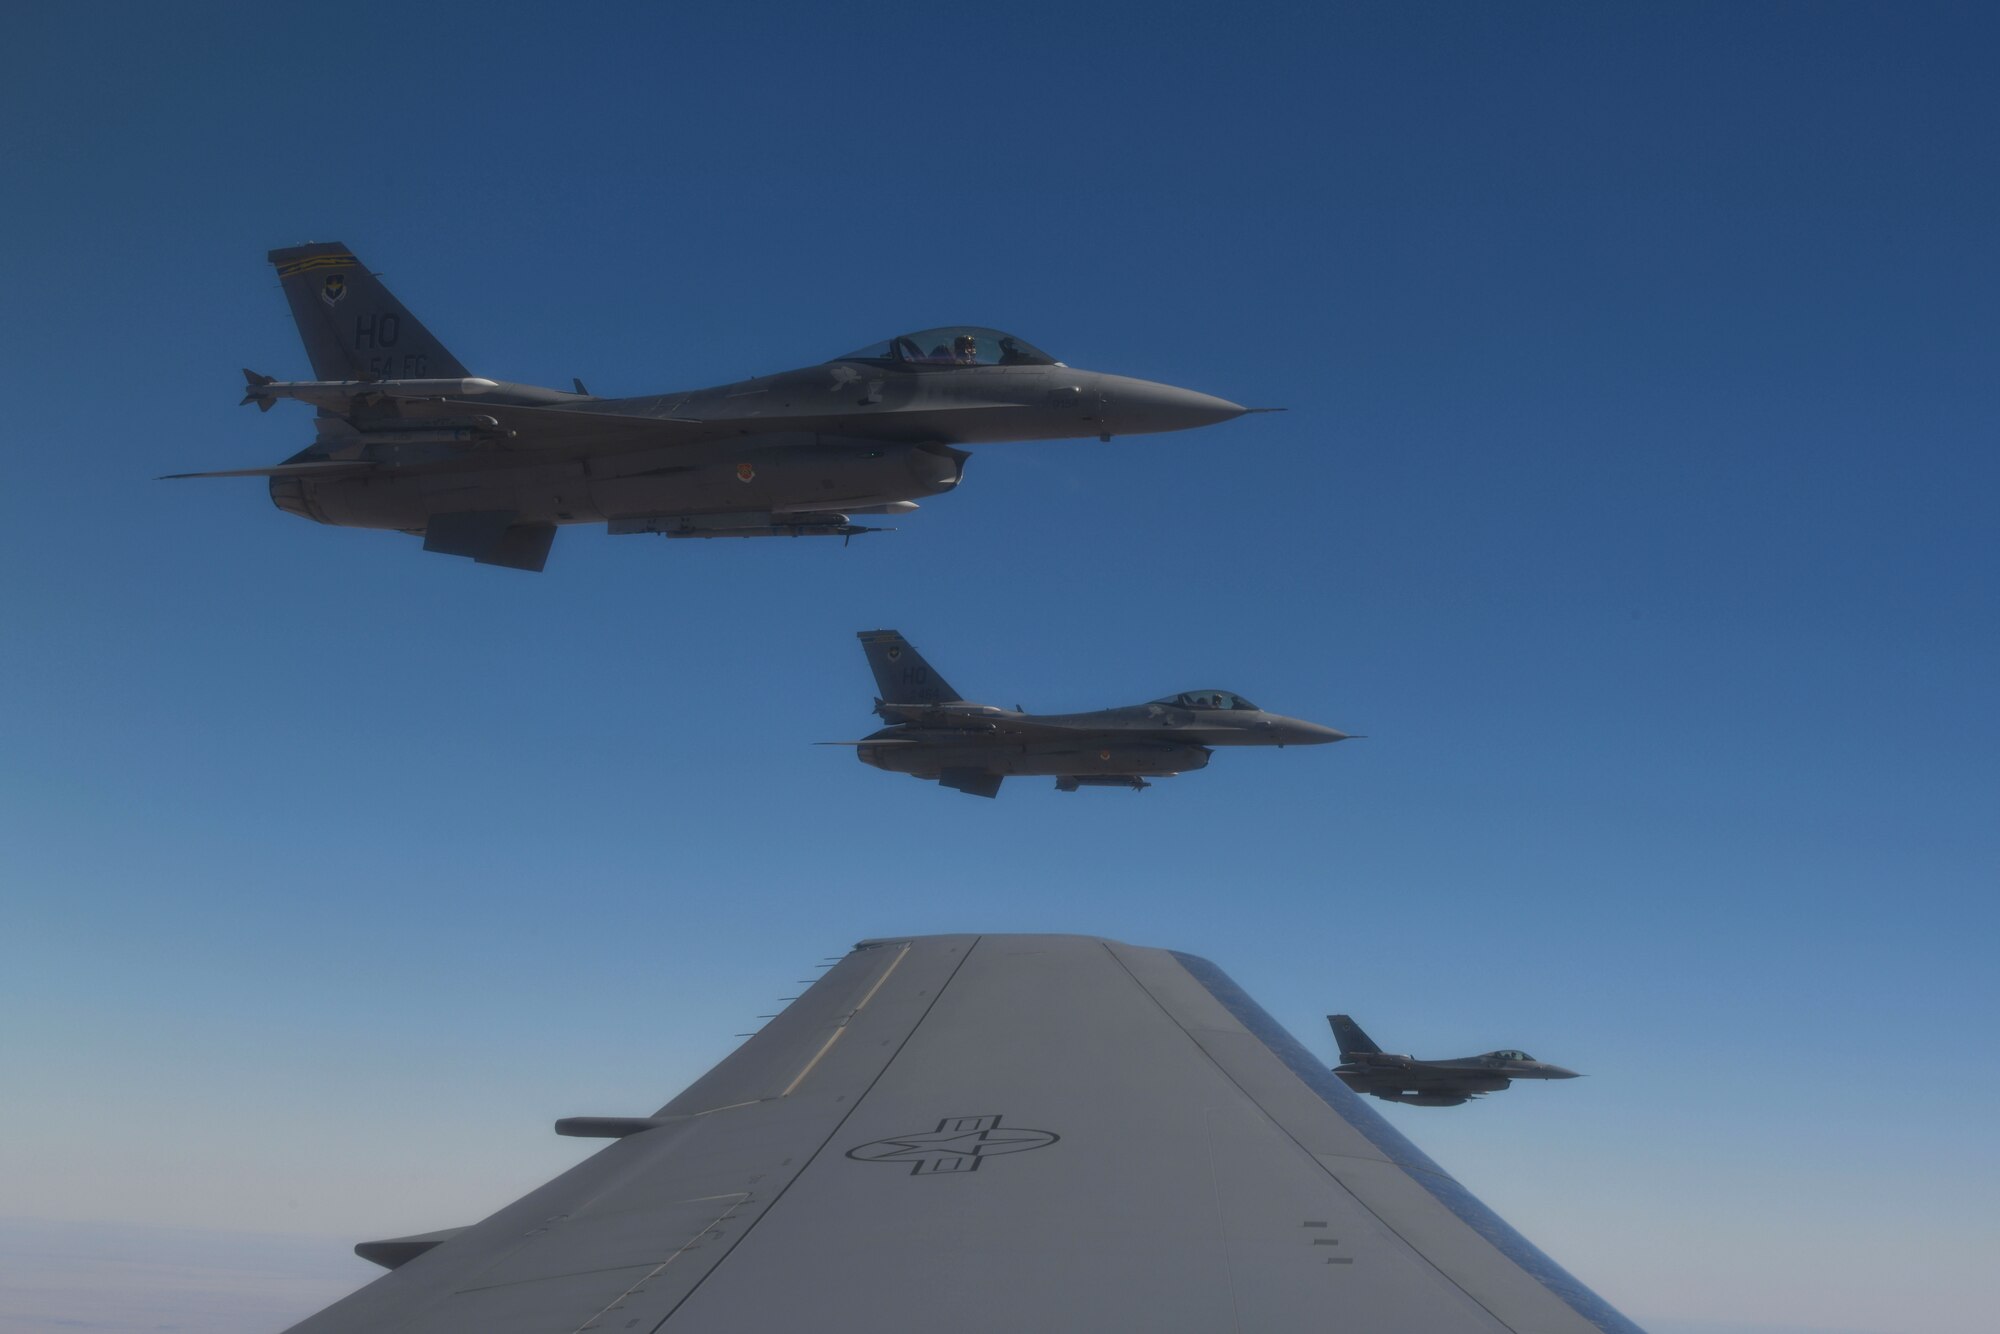 Three F-16 Fighting Falcons from the 49th Wing at Holloman Air Force Base (AFB), New Mexico, fly off the left wing of a KC-46 Pegasus from the 56th Air Refueling Squadron at Altus AFB, Oklahoma, December 7, 2020. During the training sortie over southern New Mexico, two KC-46s transferred over 65 thousand pounds of fuel to ten F-16s from Holloman AFB. (U.S. Air Force photo by Tech. Sgt. Robert Sizelove)